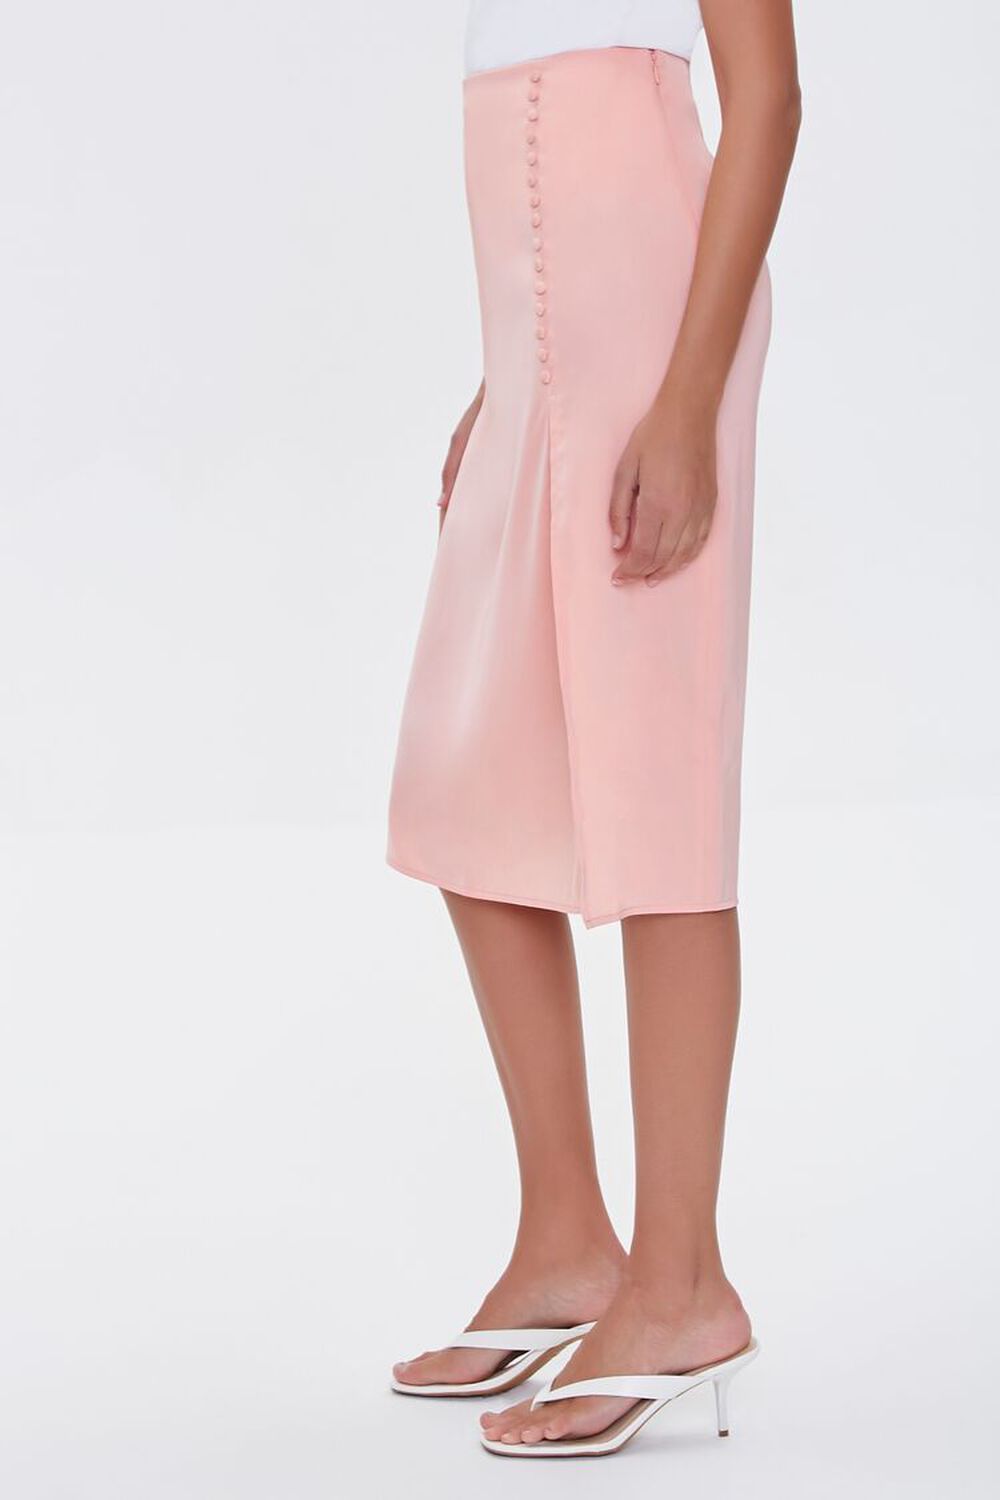 APRICOT Button-Front Slit Skirt, image 3